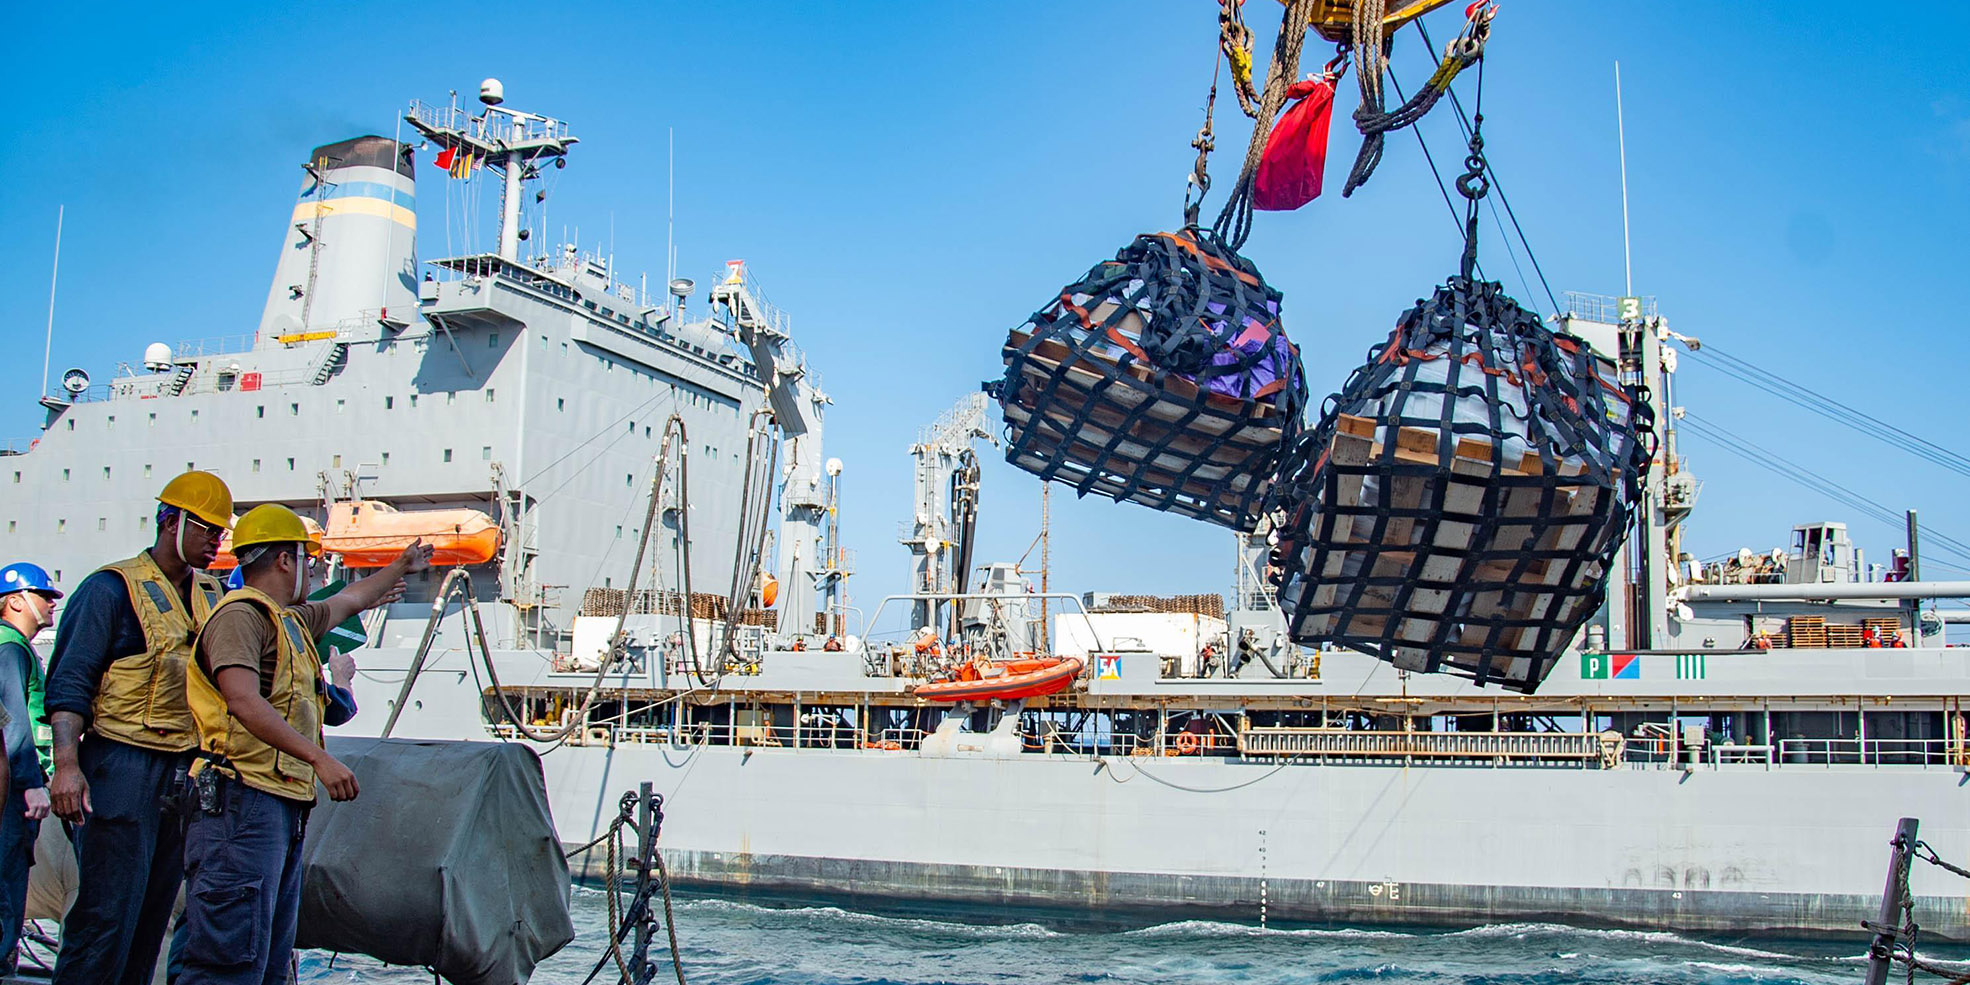 Sailors aboard the guided-missile destroyer USS Winston S. Churchill (DDG 81) send pallets to the fleet replenishment oiler USNS Leroy Grumman (T-AO 195) during a replenishment-at-sea in the Arabian Sea, Jan. 19, 2021.